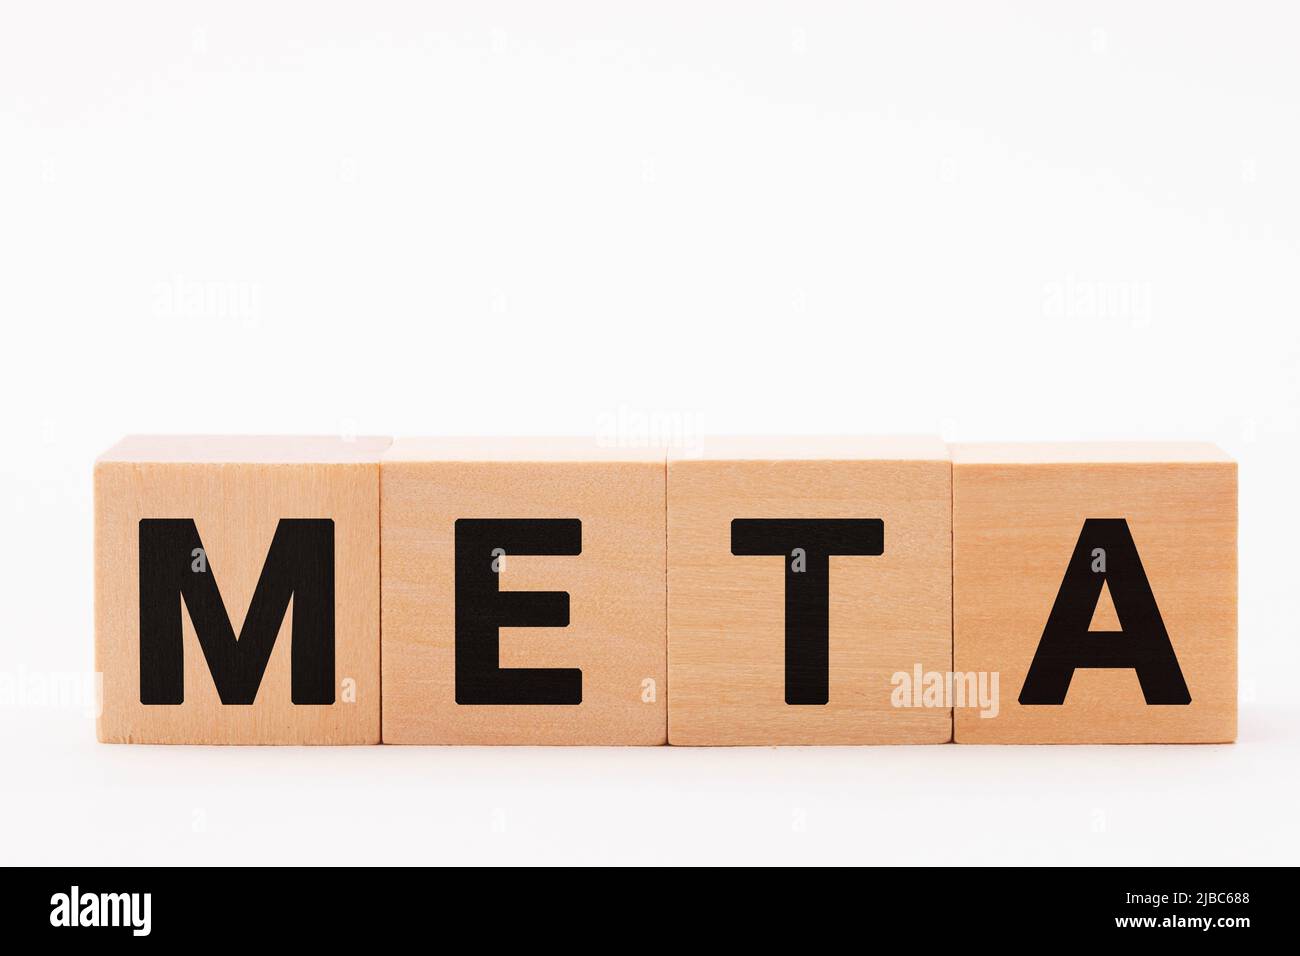 META, metafiction characters. The letters META drawn on a wooden block. Black text Stock Photo